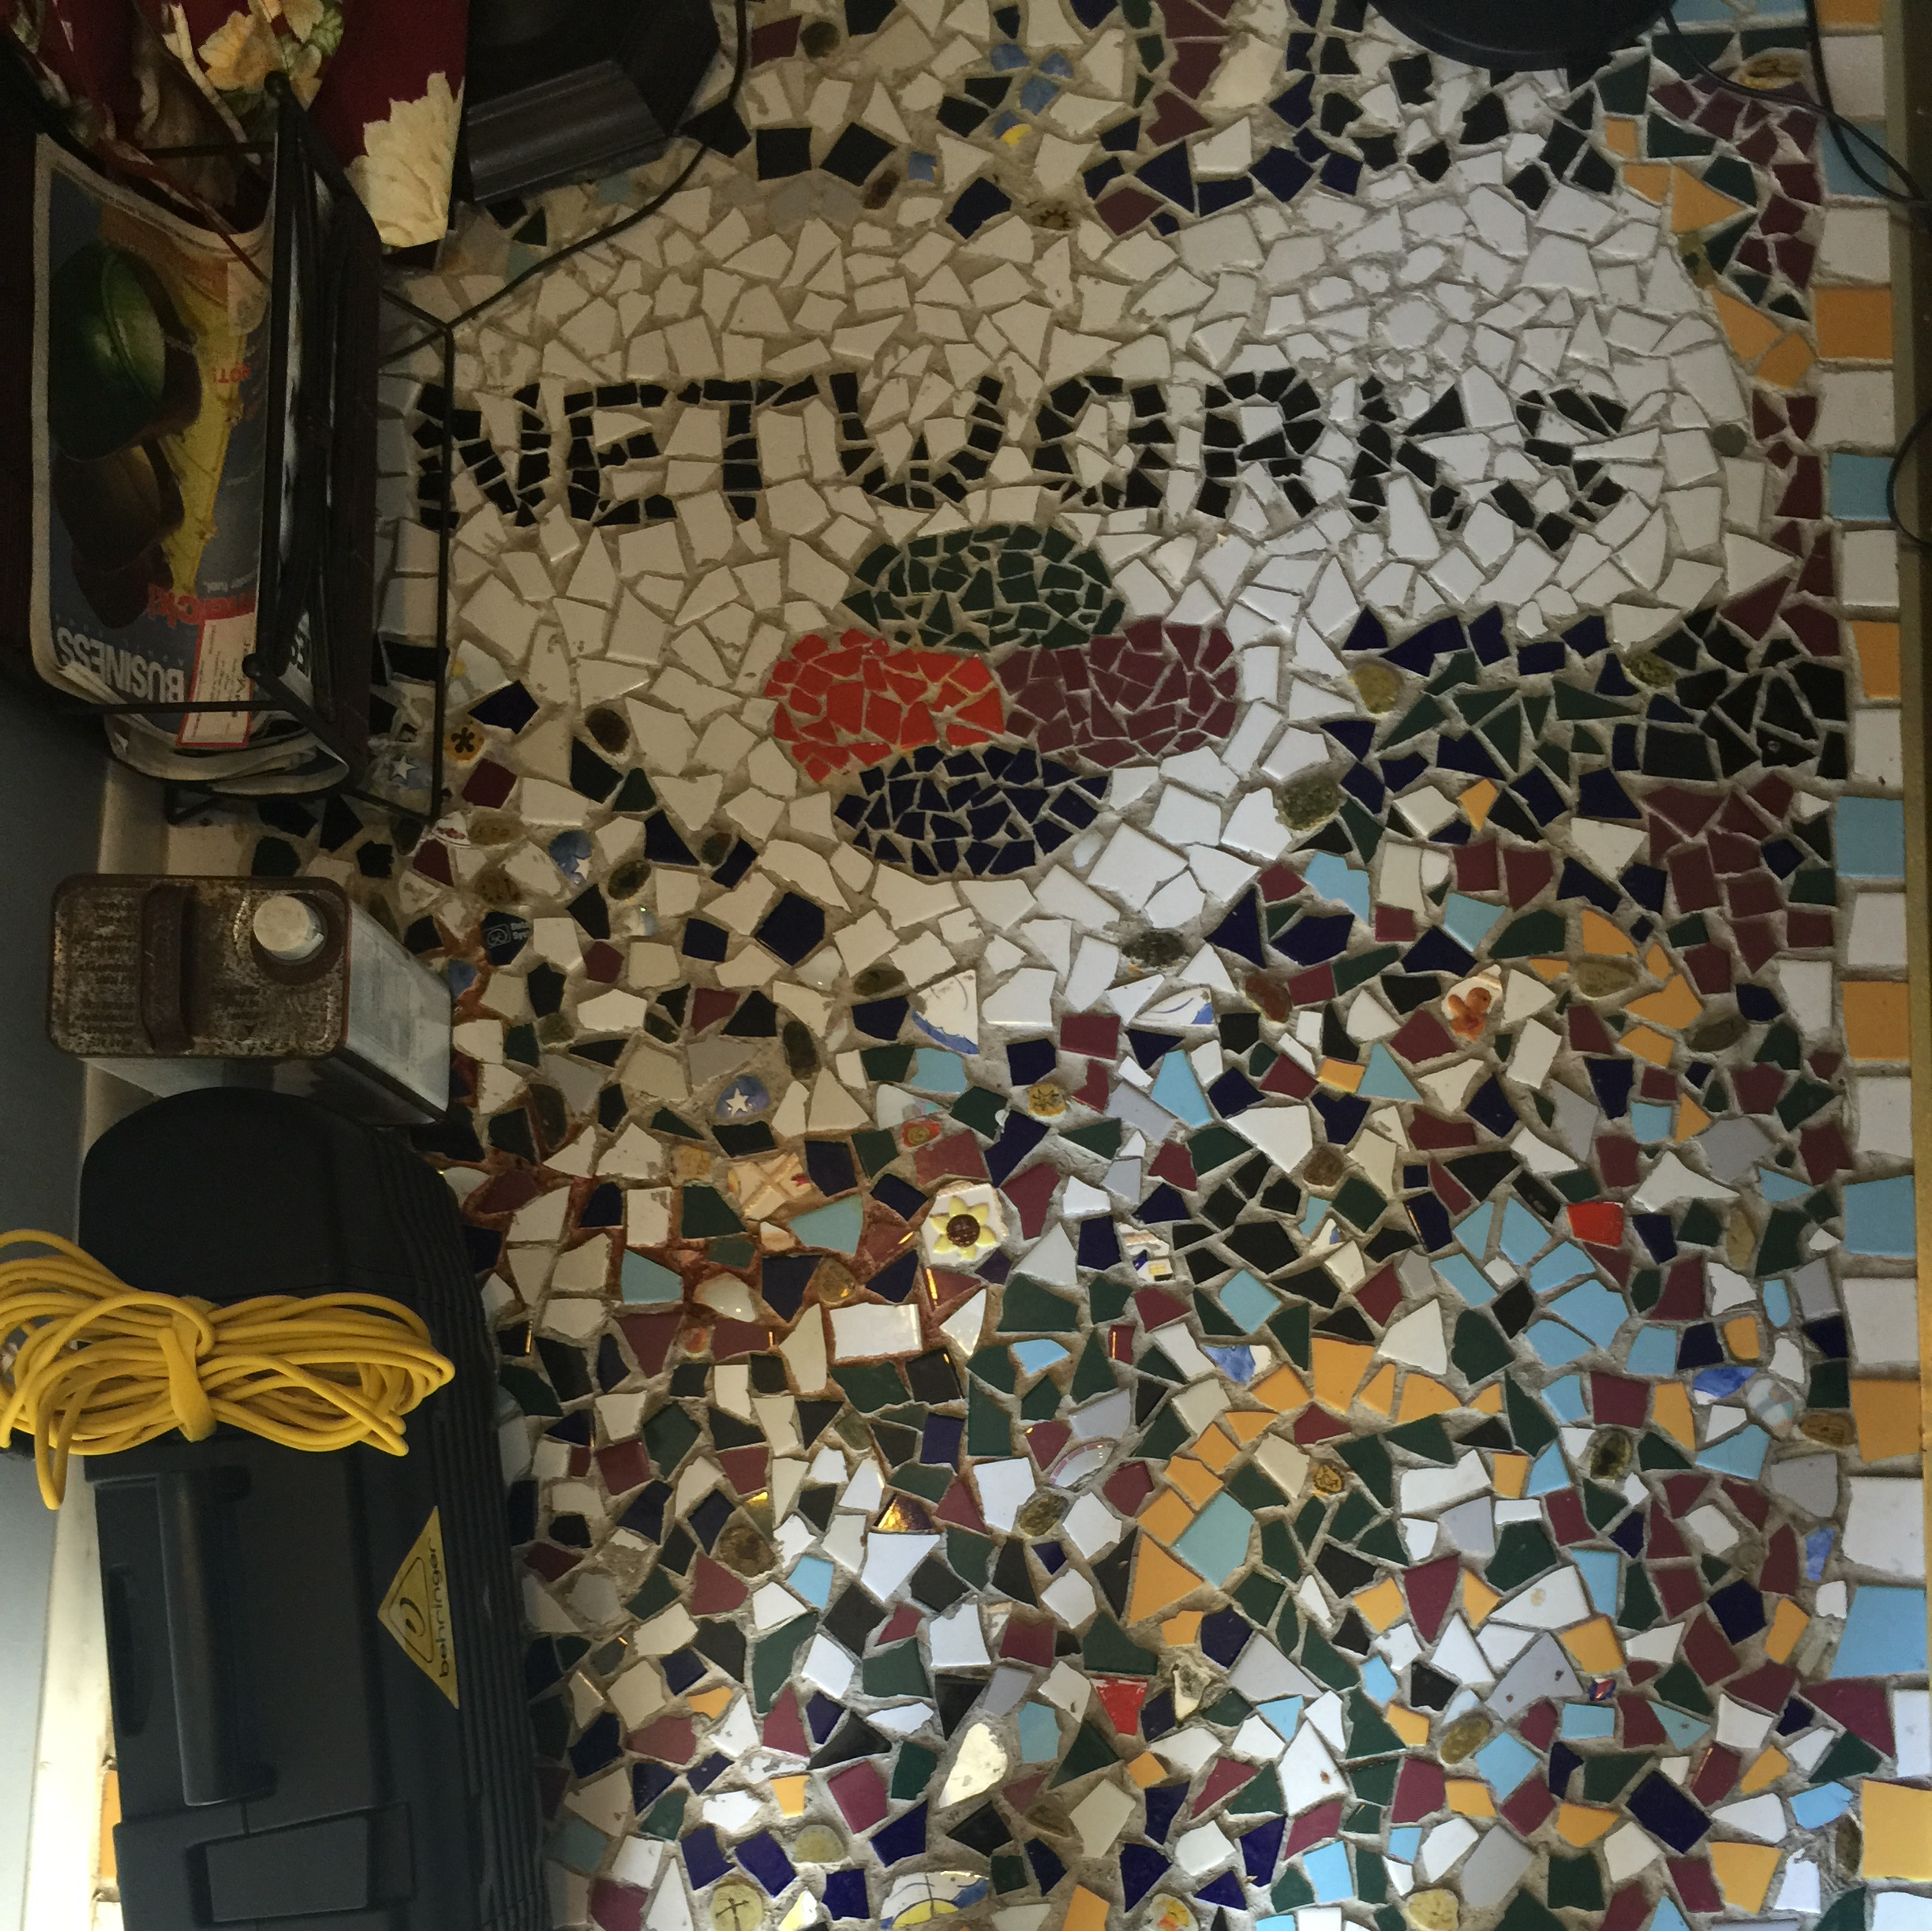 Networks' staff worked on creating a mosaic for the Valley Forge Office